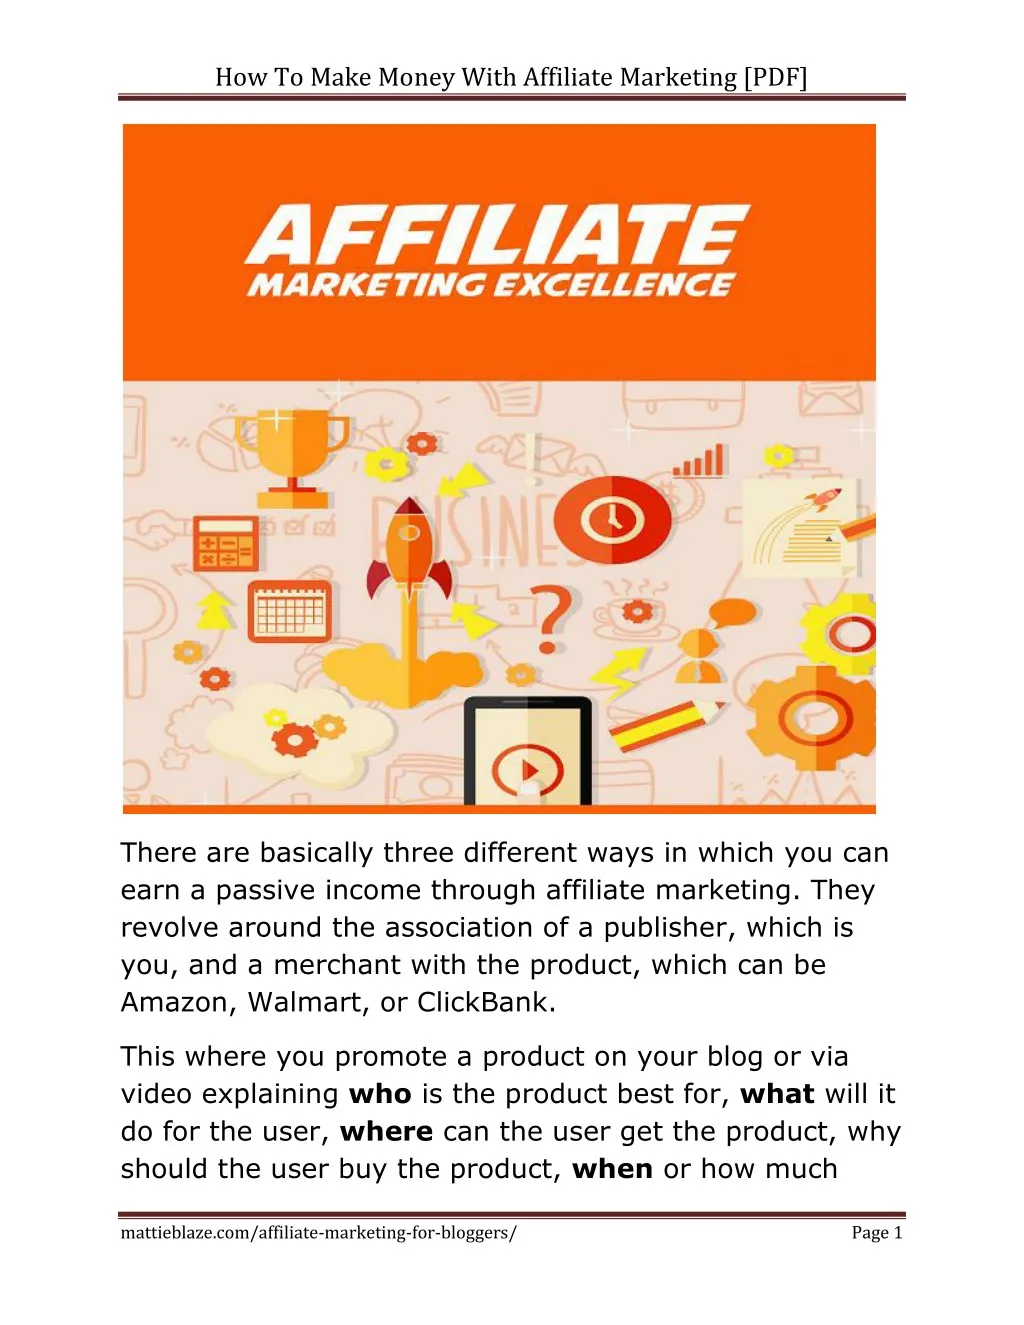 how to make money with affiliate marketing pdf